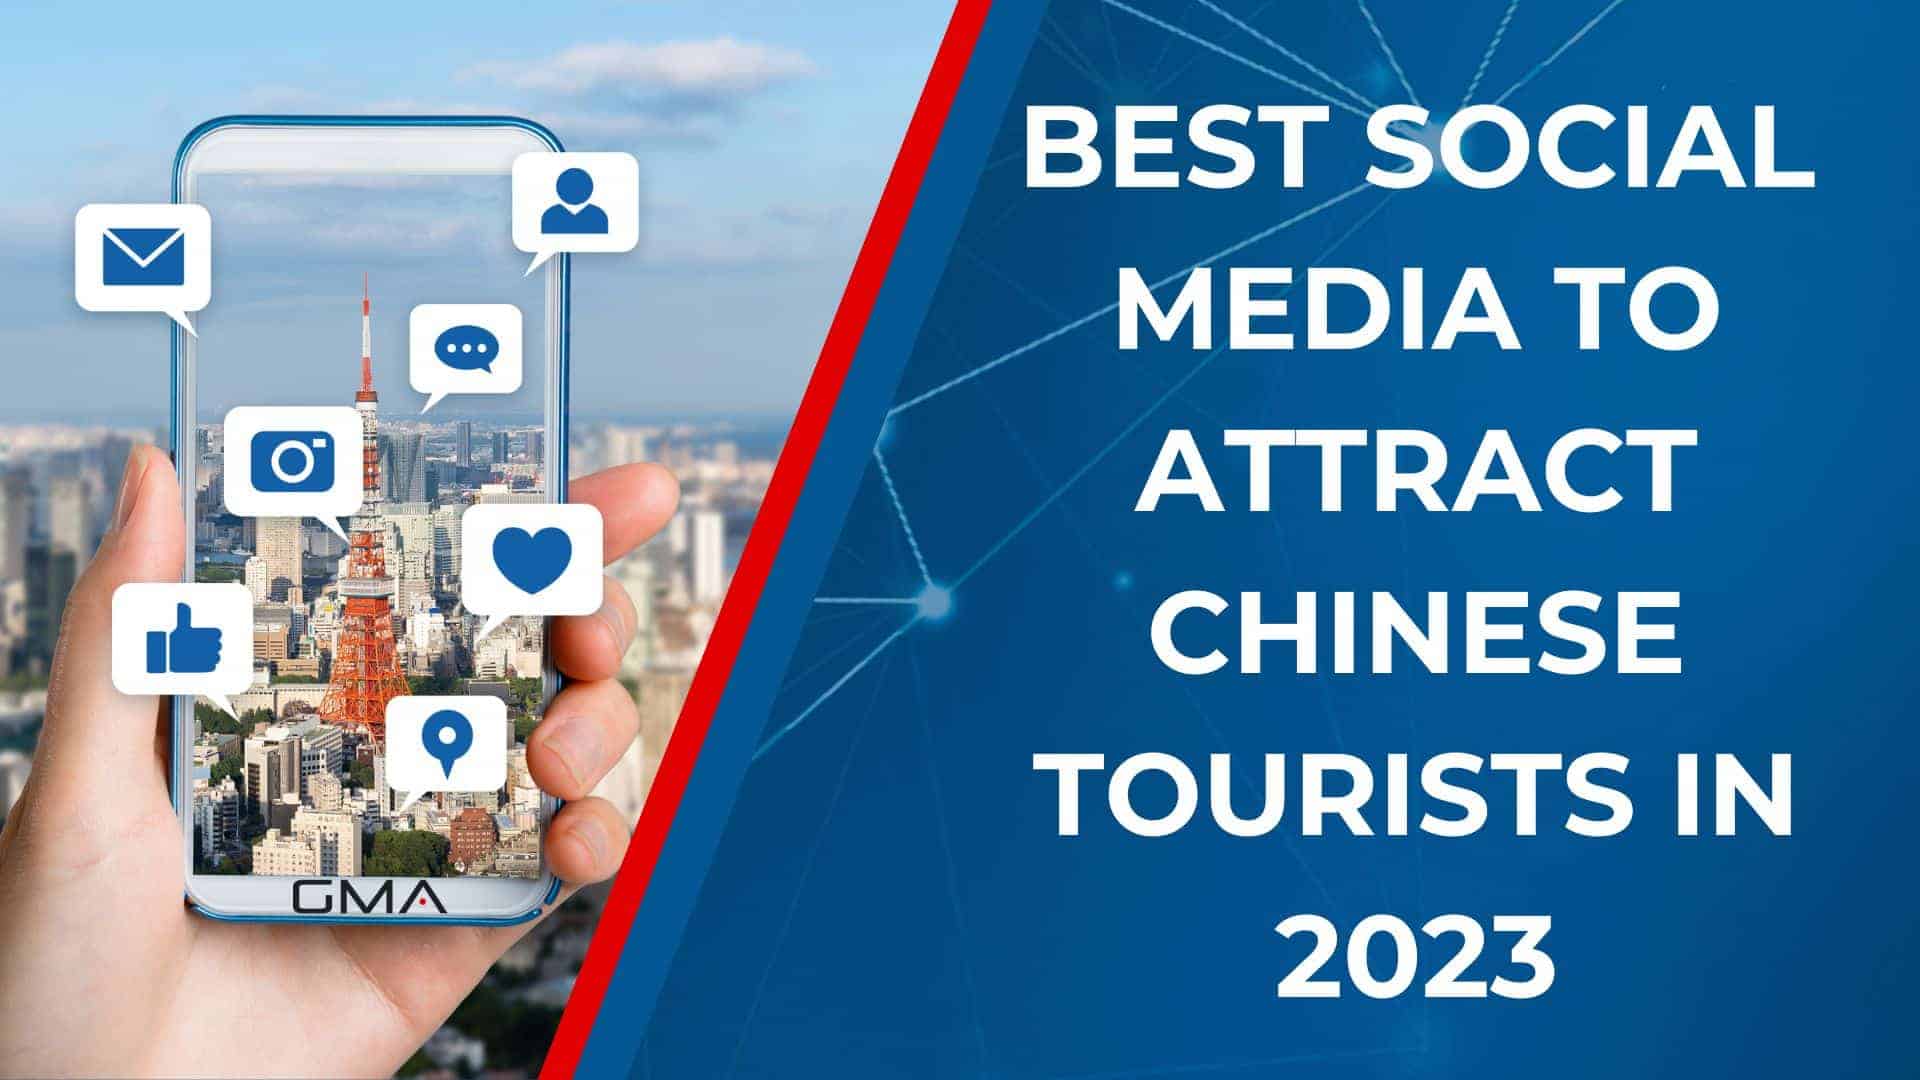 Best Social Media to Attract Chinese Tourists in 2023